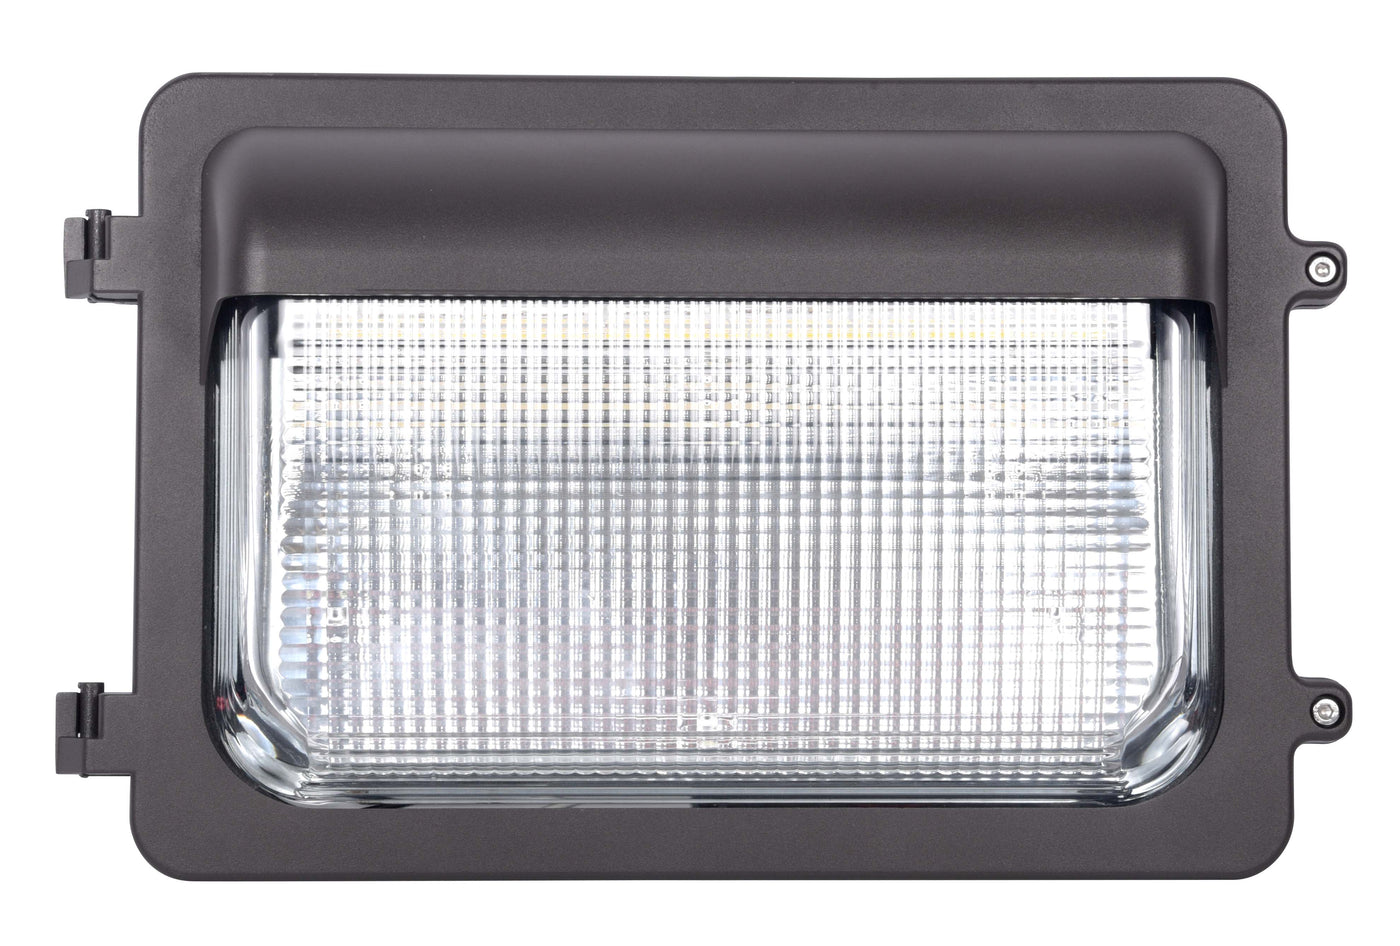 LED Slim Wall Pack, 7500 Lumen Max, Wattage and CCT Selectable, 120-277V, Photocell Included, Bronze Finish